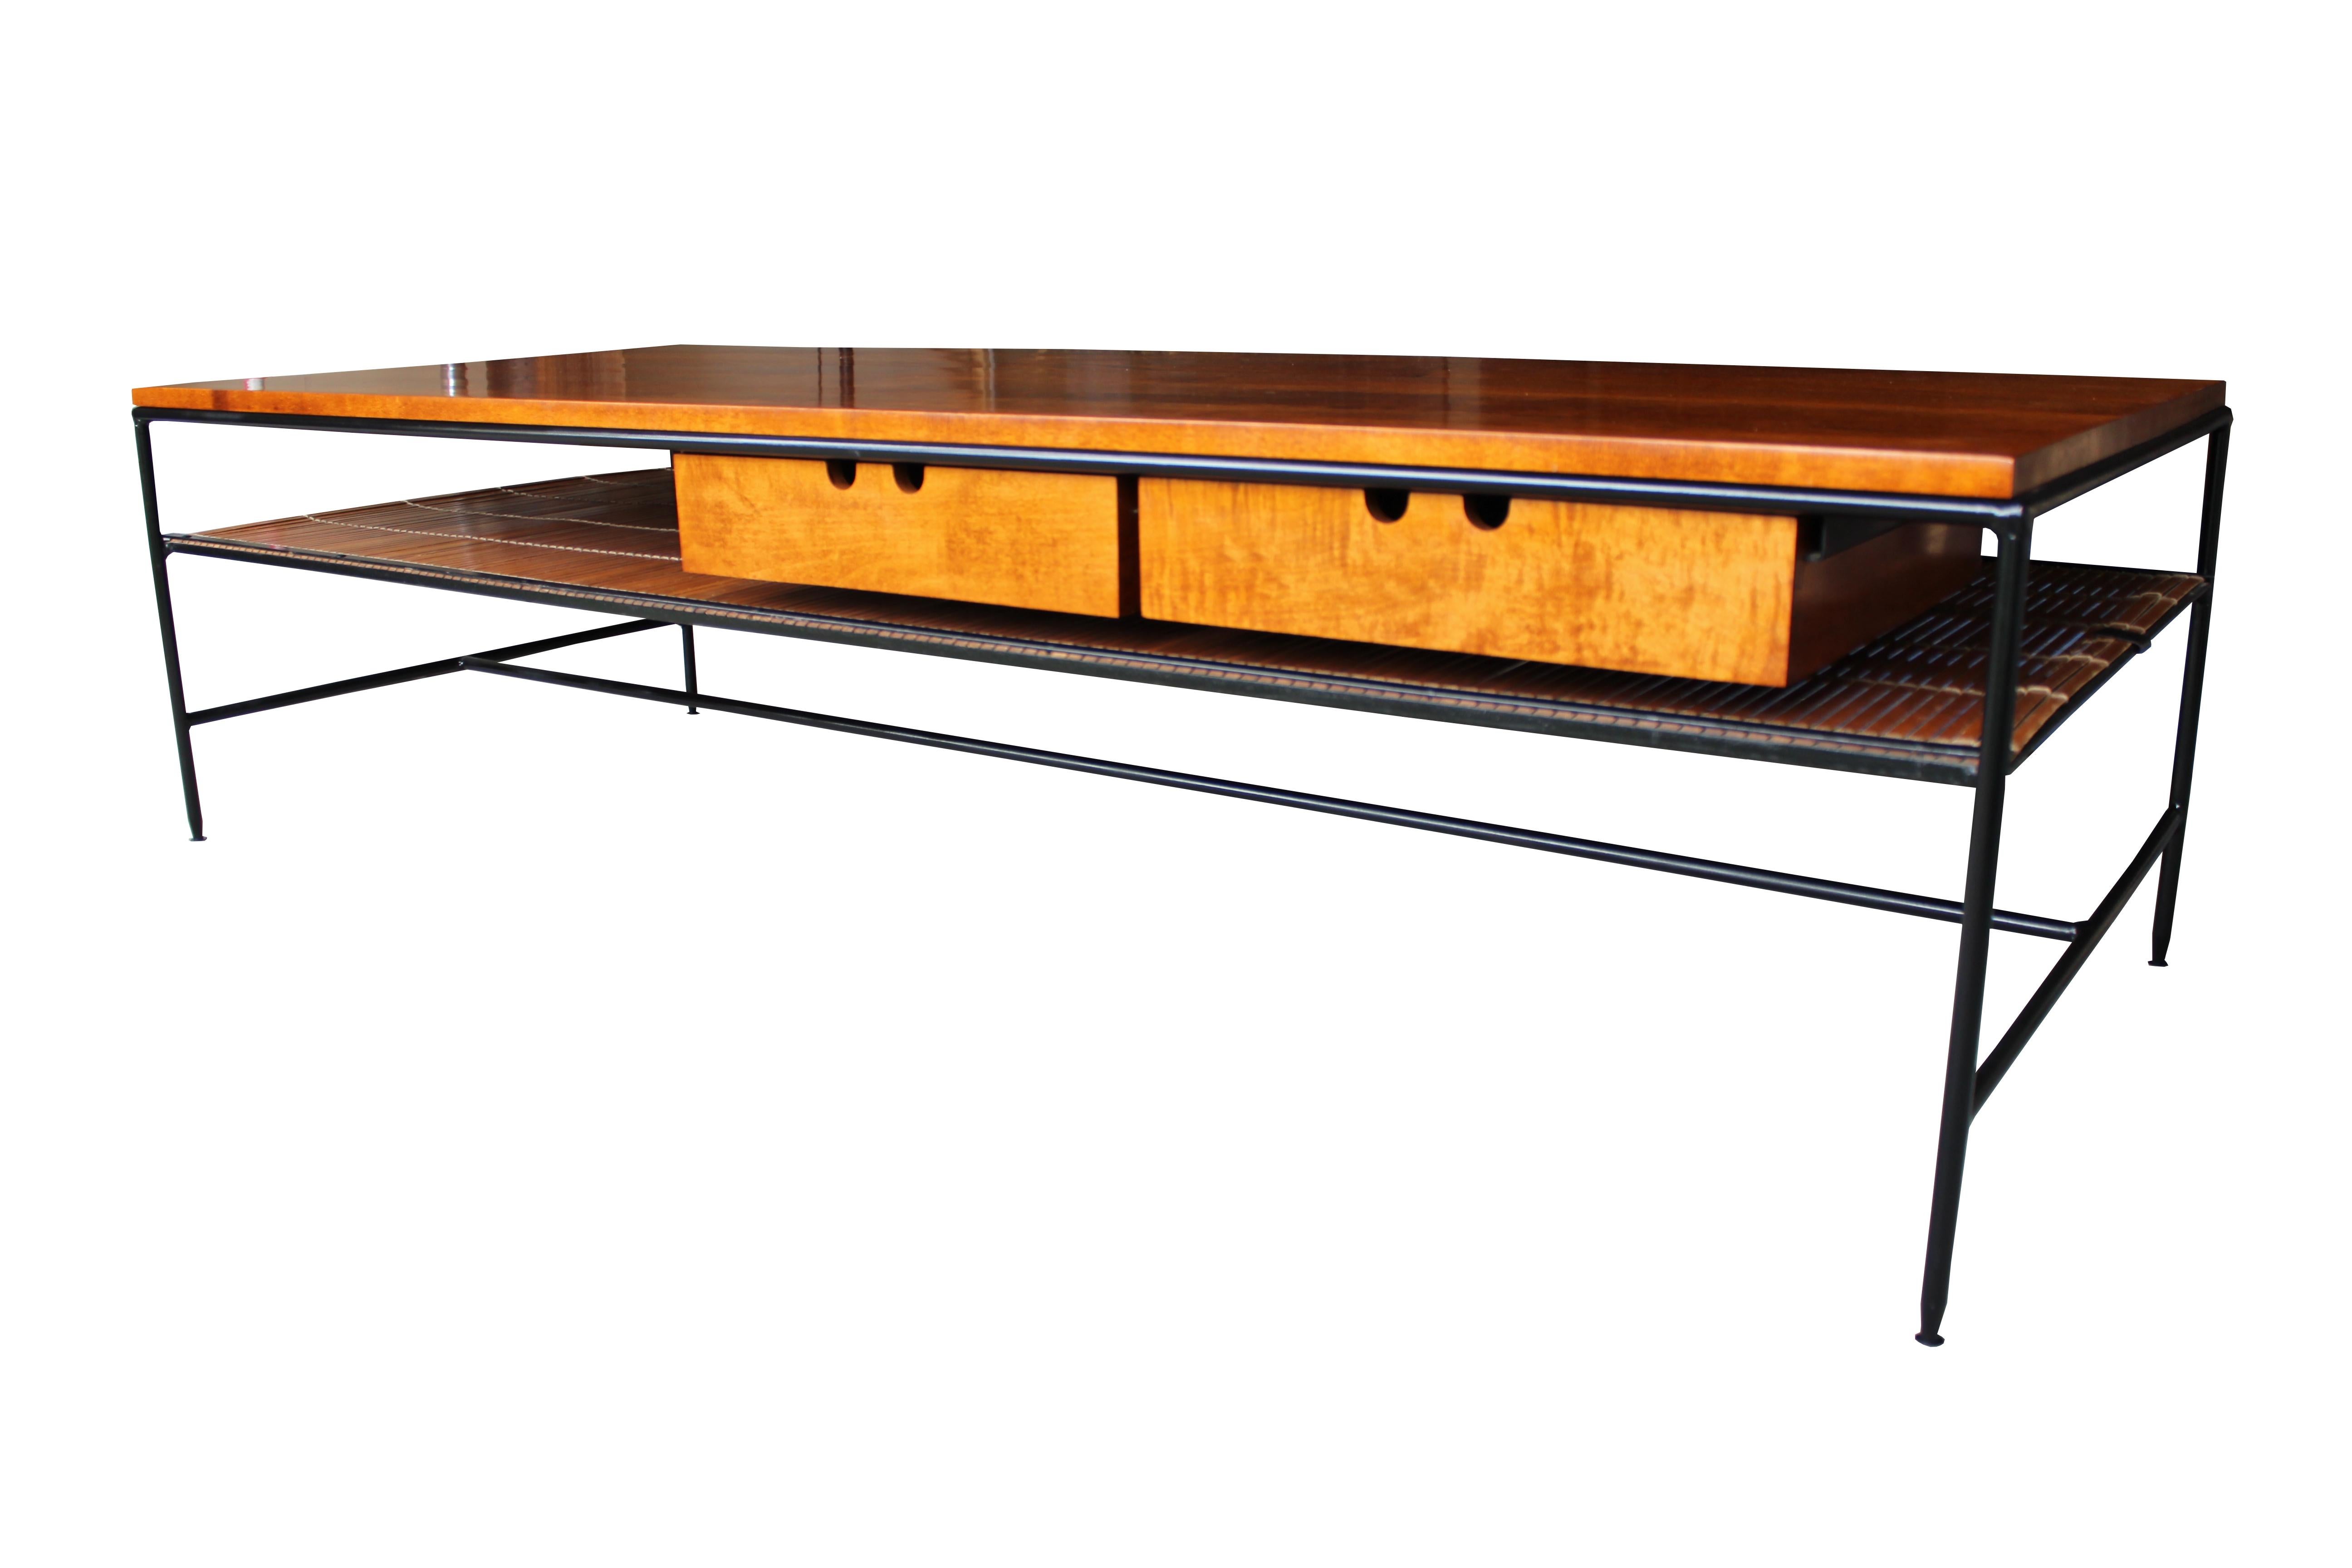 American Mid-Century Modern Maple Coffee Table by Paul McCobb for Planner For Sale